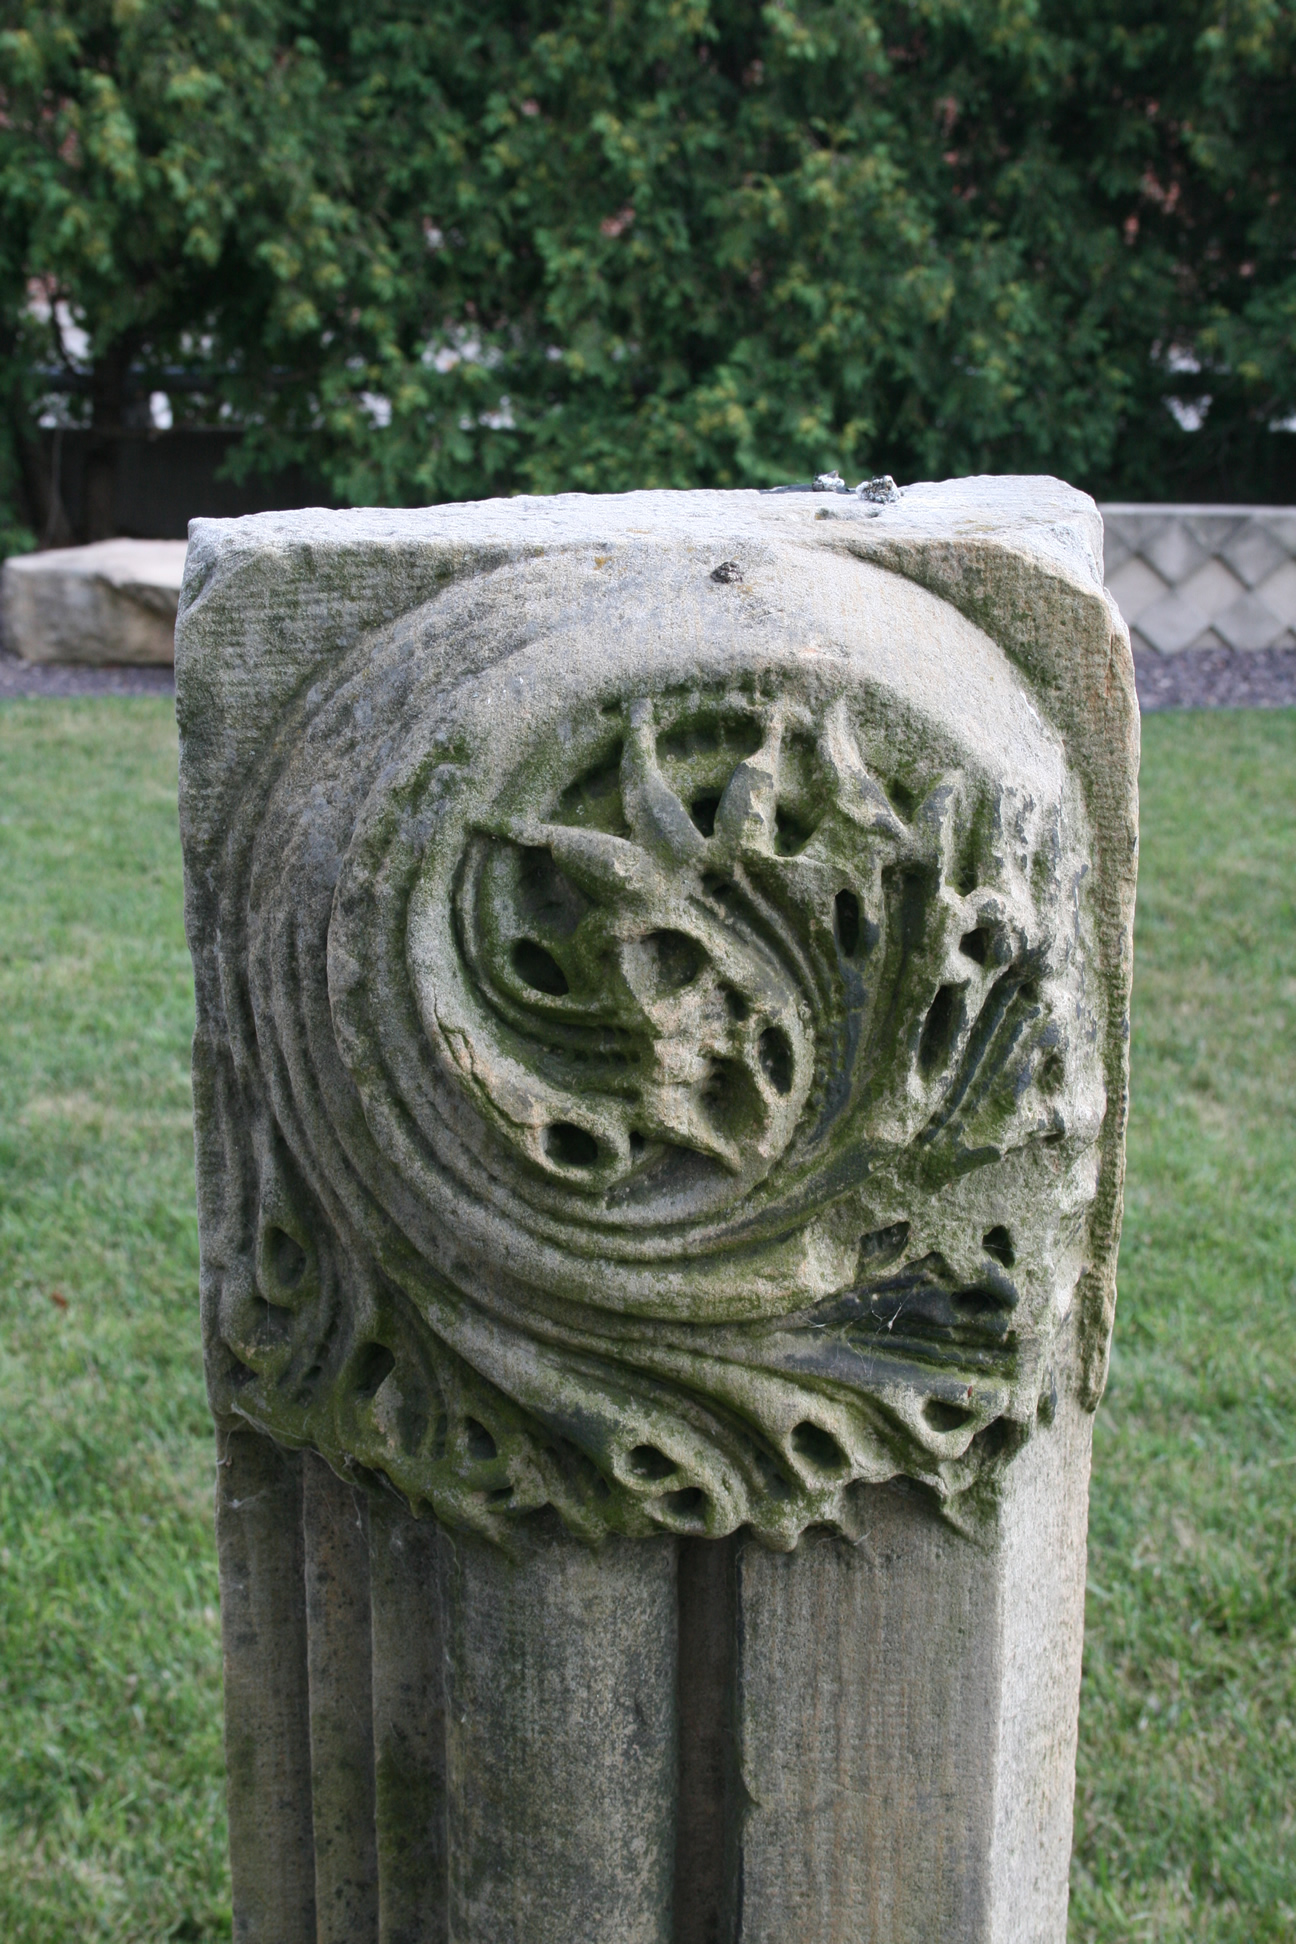 the old stone post has a circular knot around it